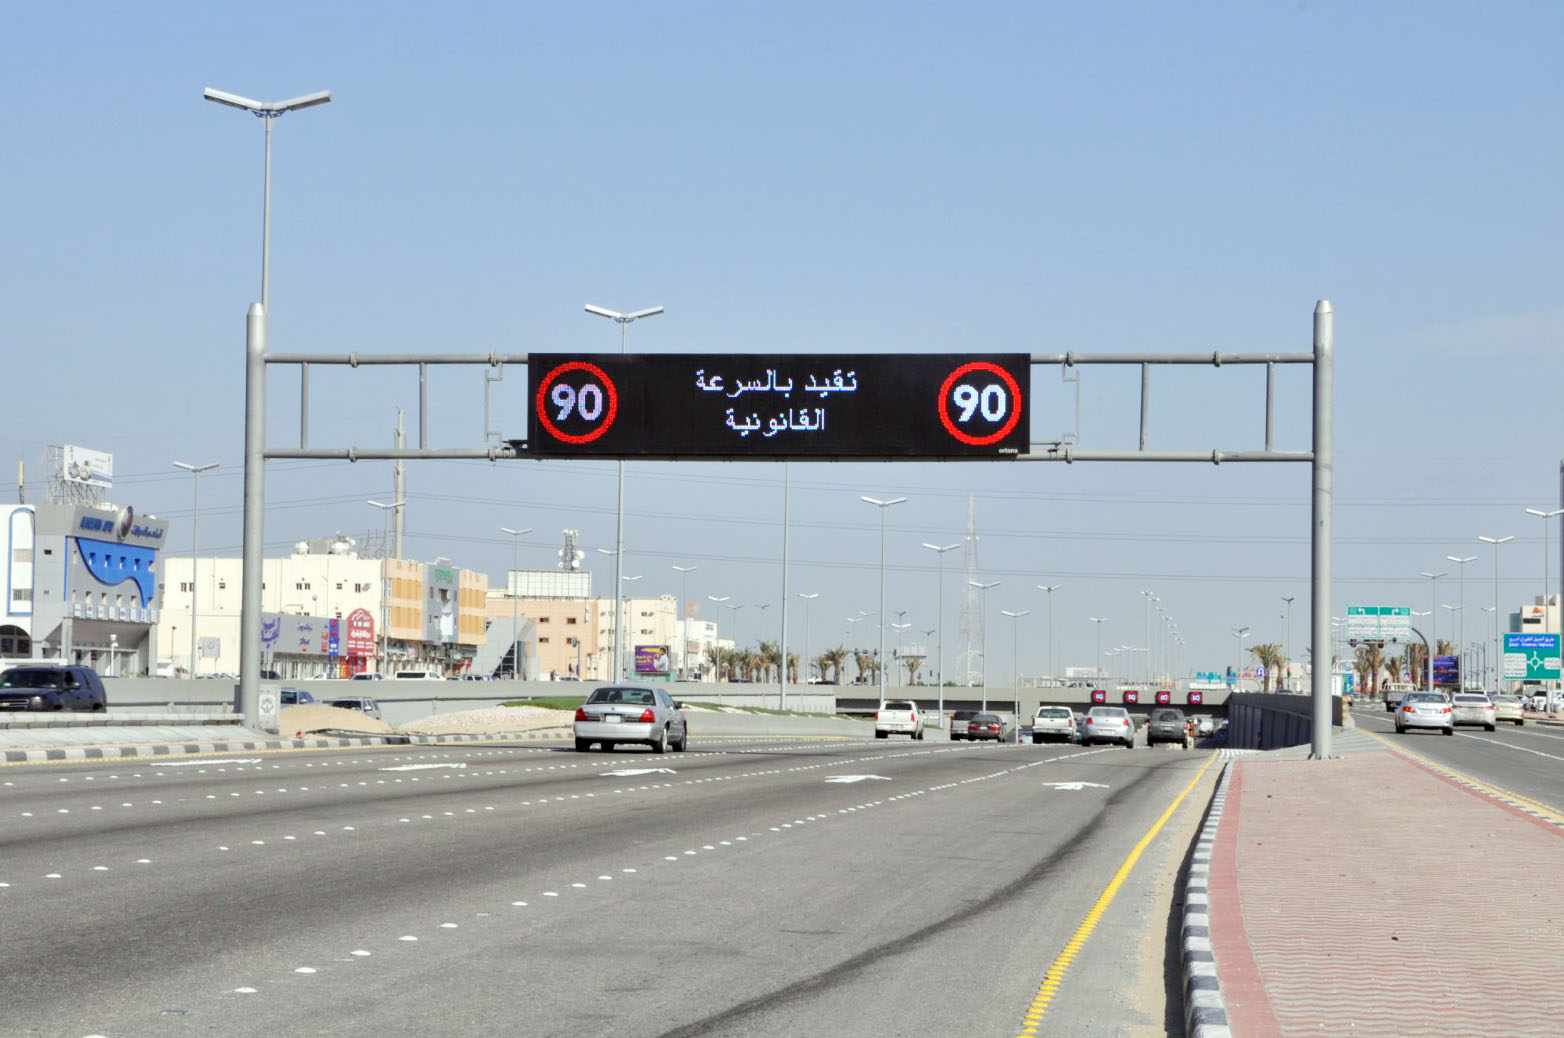 Highly Durable and Reliable LED Variable Message Signs for Transport and Highways Applications